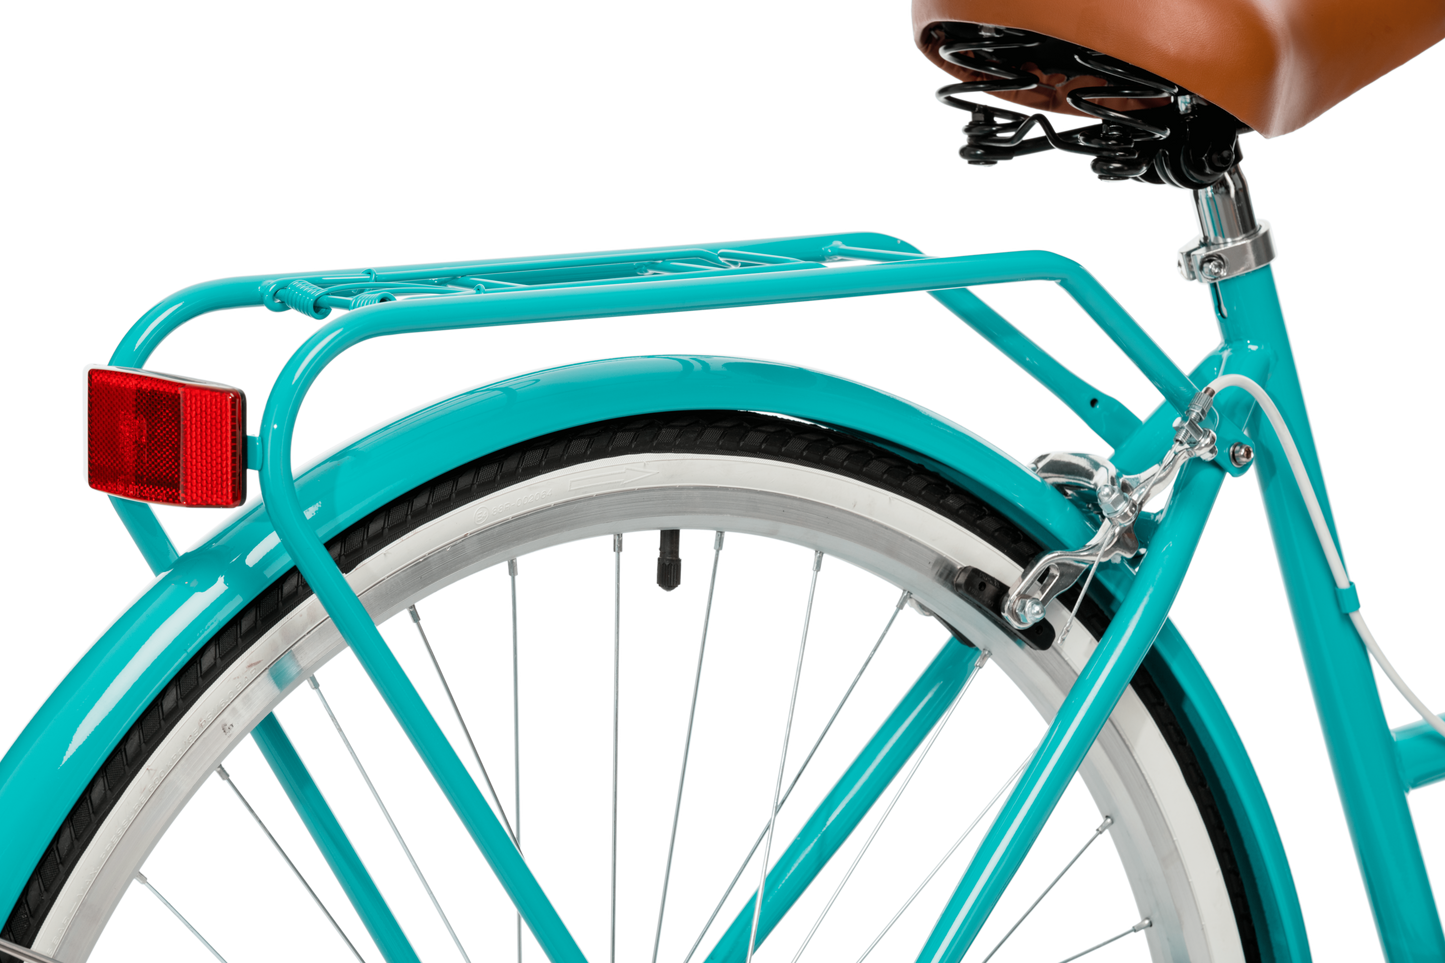 Ladies Classic Plus Vintage Bike in Turquoise featuring rear pannier rack and red reflector from Reid Cycles Australia